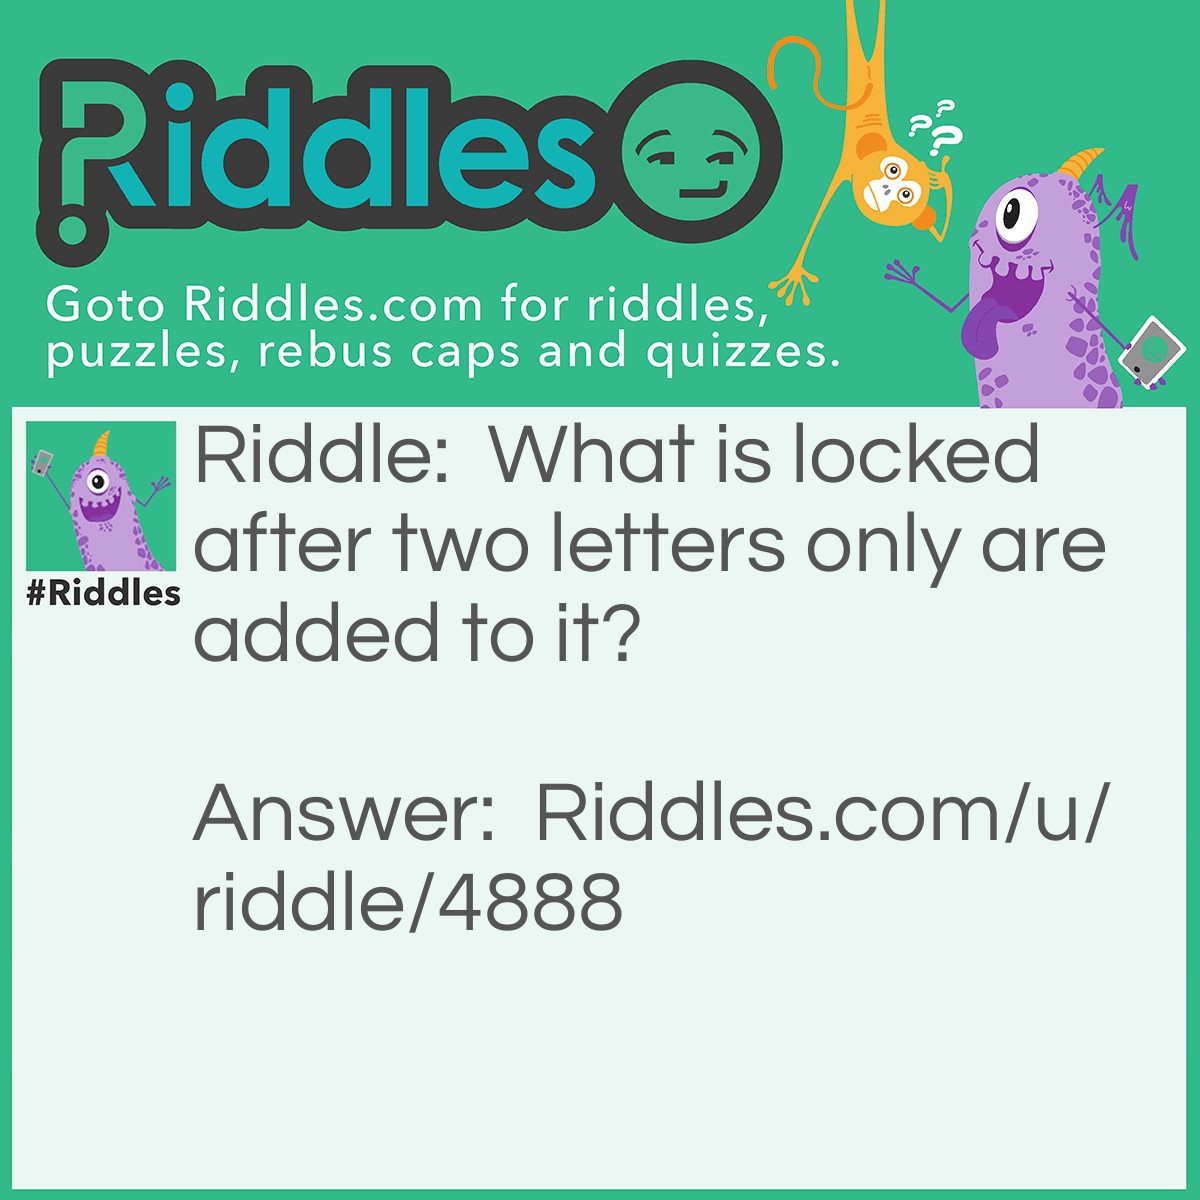 Riddle: What is locked after two letters only are added to it? Answer: Lock.